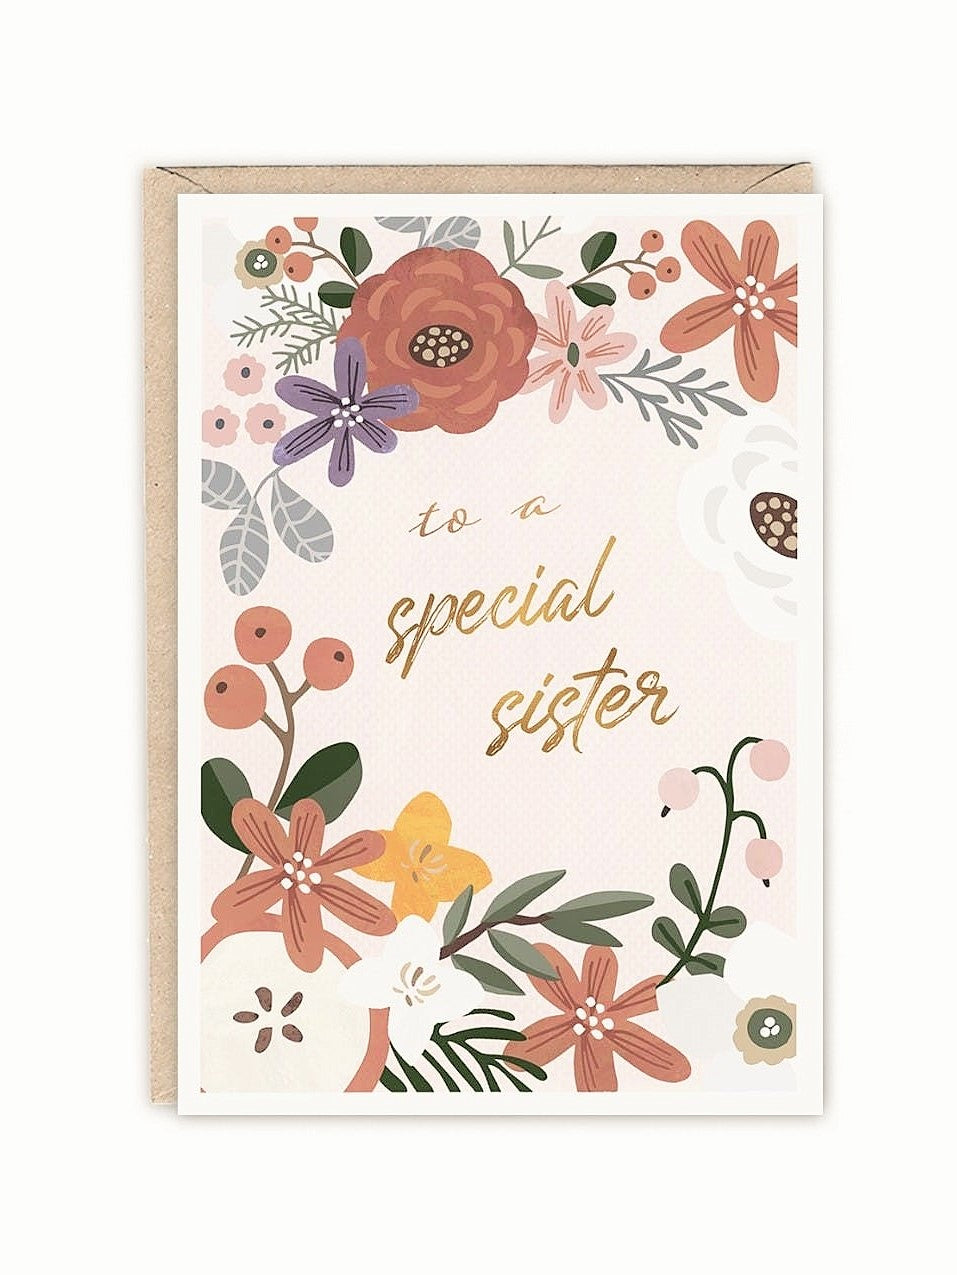 SPECIAL SISTER Card SS24 designed by Emma Bryan